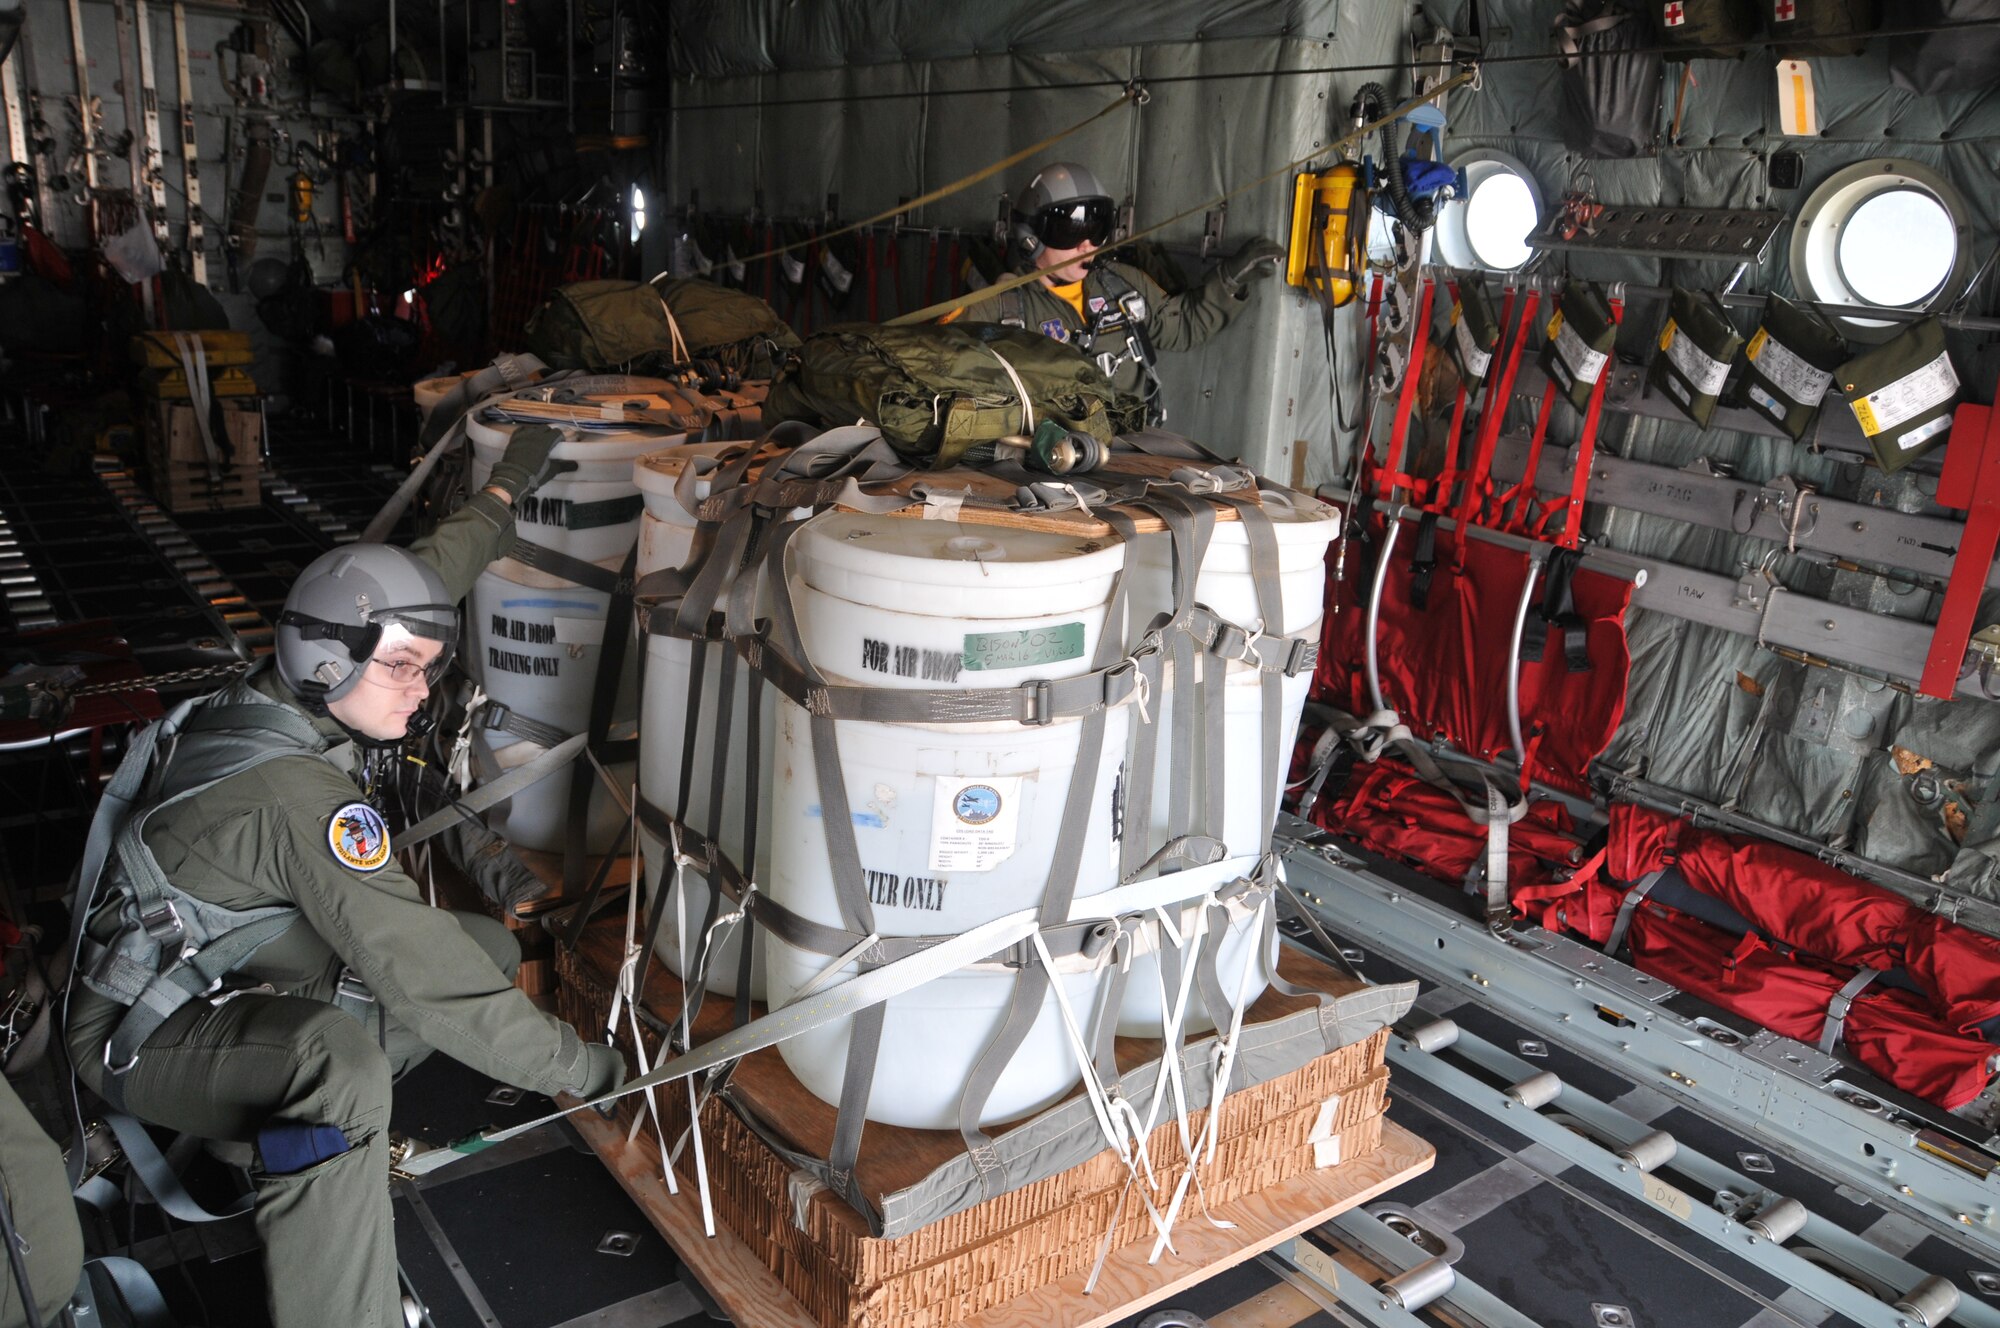 A loadmaster from the 186th Airlift Squadron prepares to release a training cargo load aboard a Montana Air National Guard C-130 cargo aircraft over the drop zone Chargin' Charlie at Malmstrom Air Force Base, Mont. March 5, 2016. Each load weighs nearly 1,000 pounds and was dropped from 1500 feet. (U.S. Air National Guard photo/Tech. Sgt. Michael Touchette)

